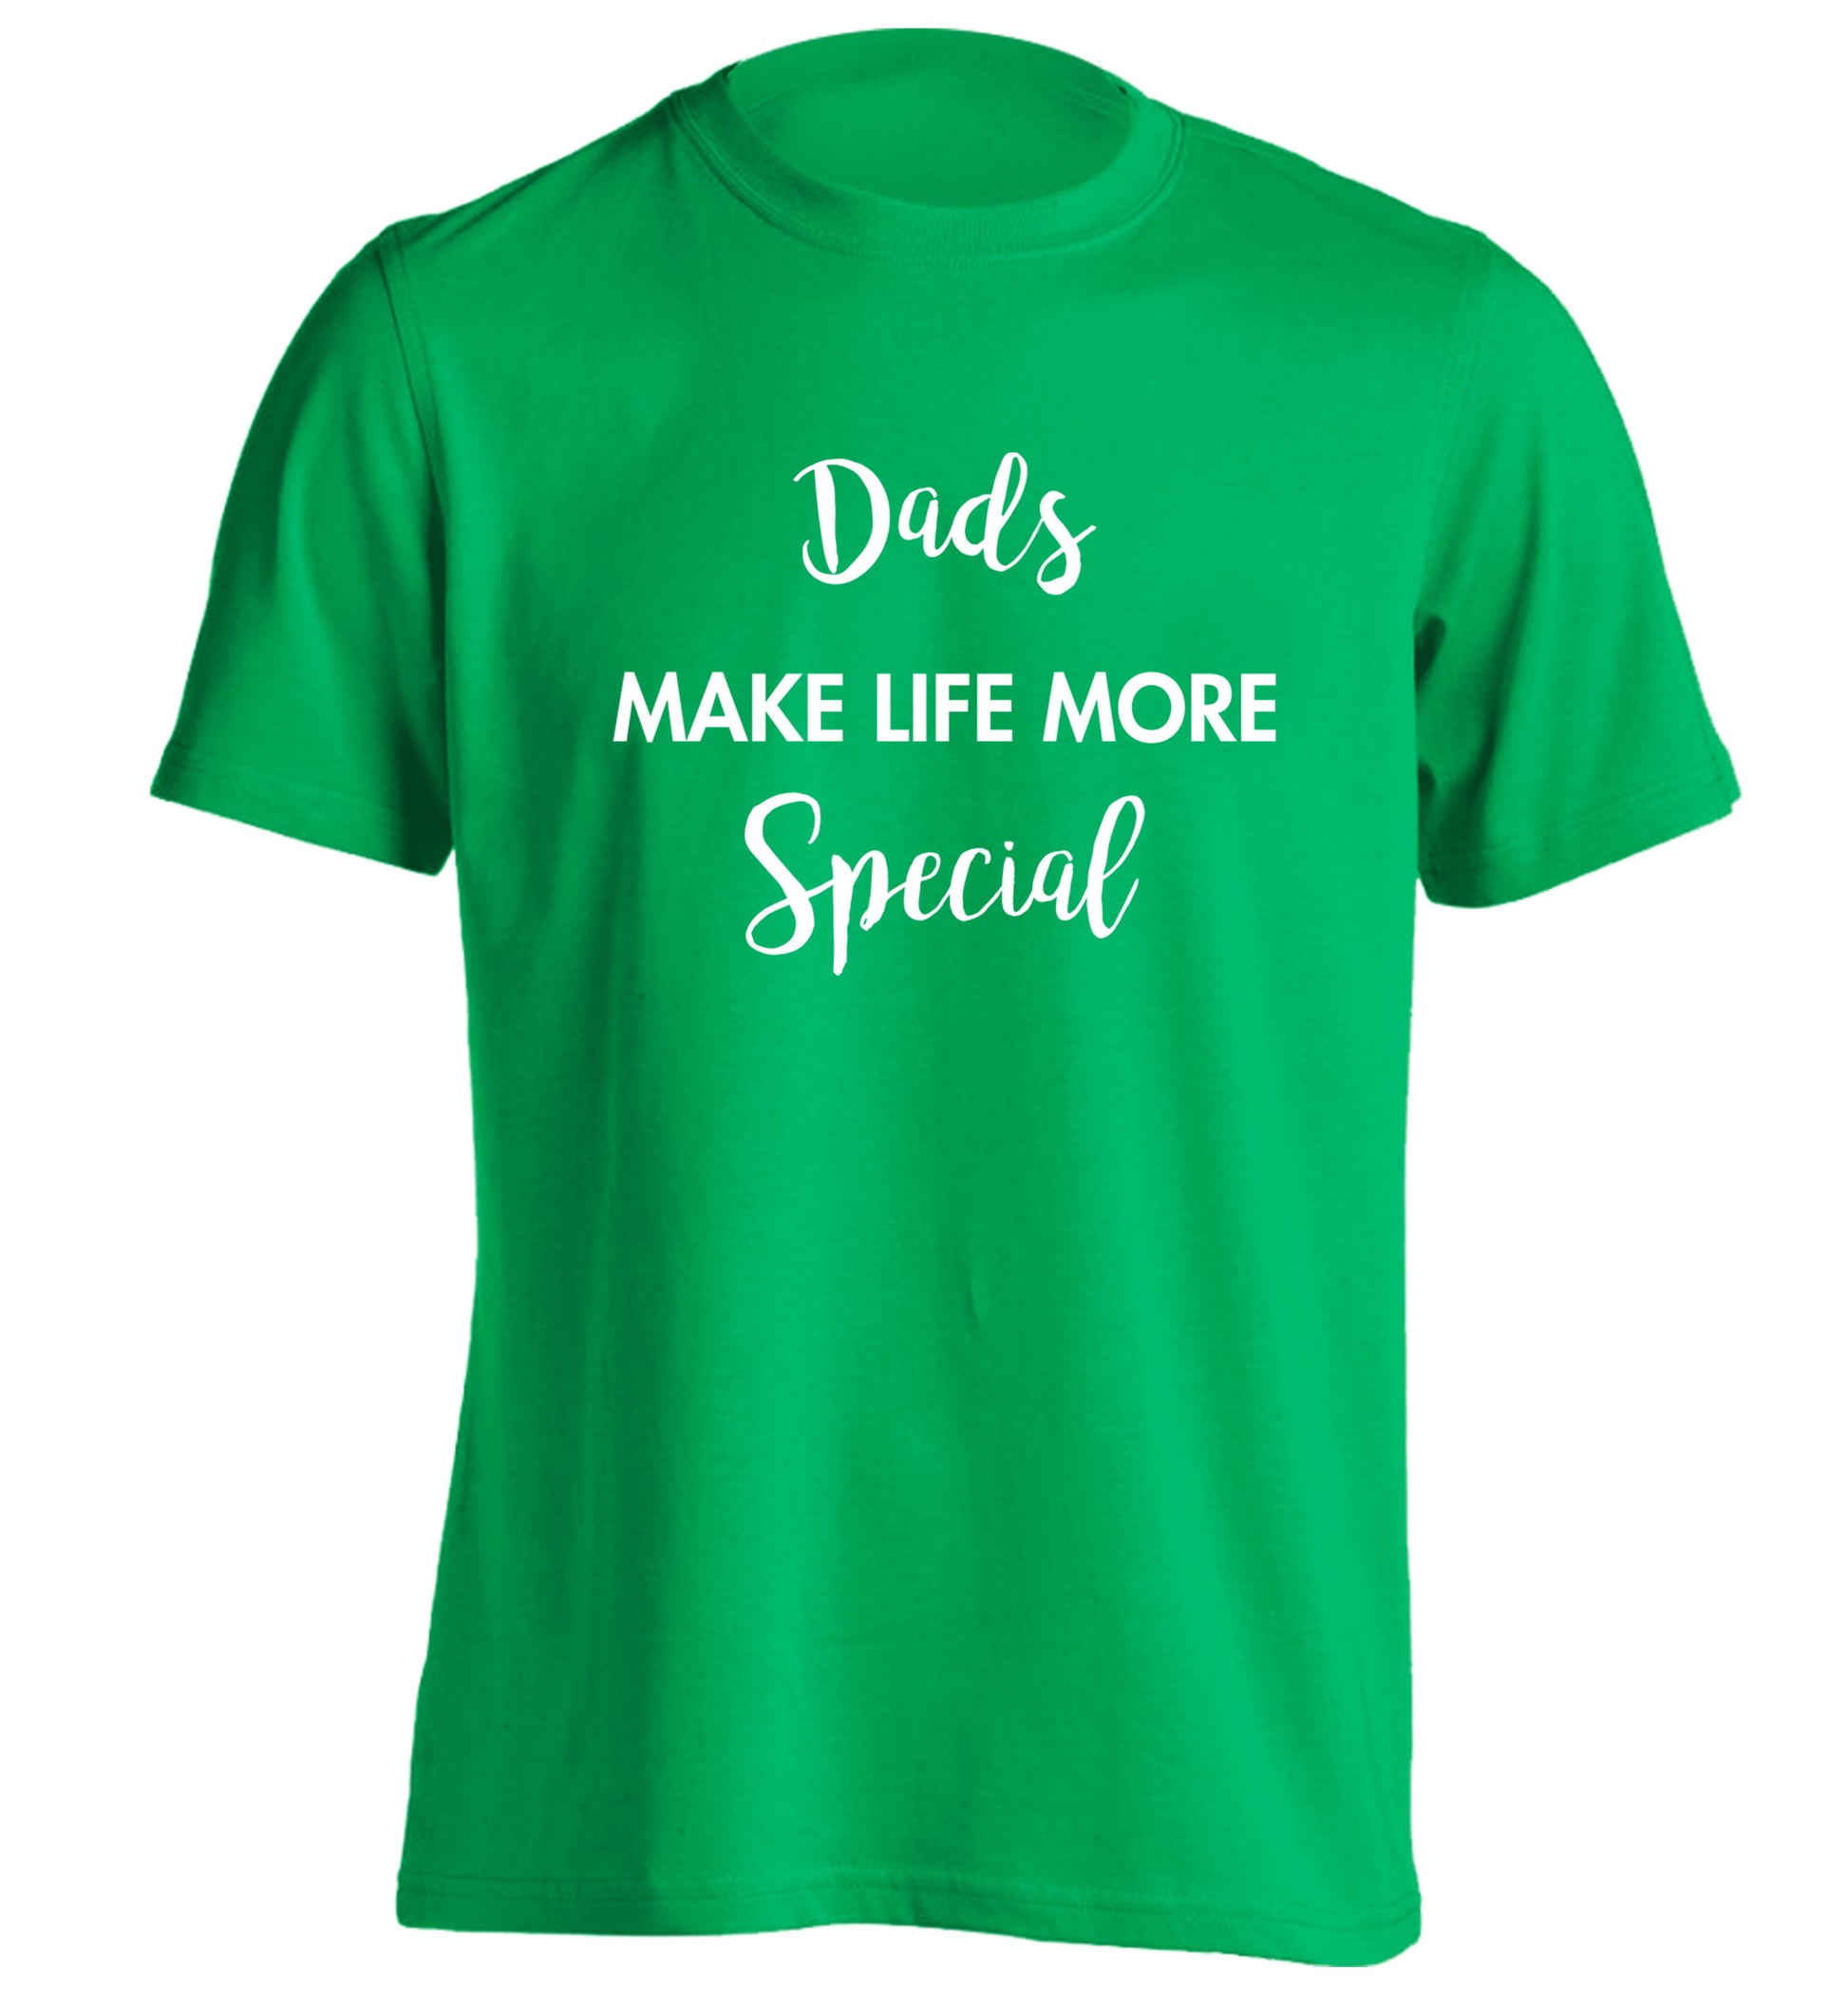 Dads make life more special adults unisex green Tshirt 2XL